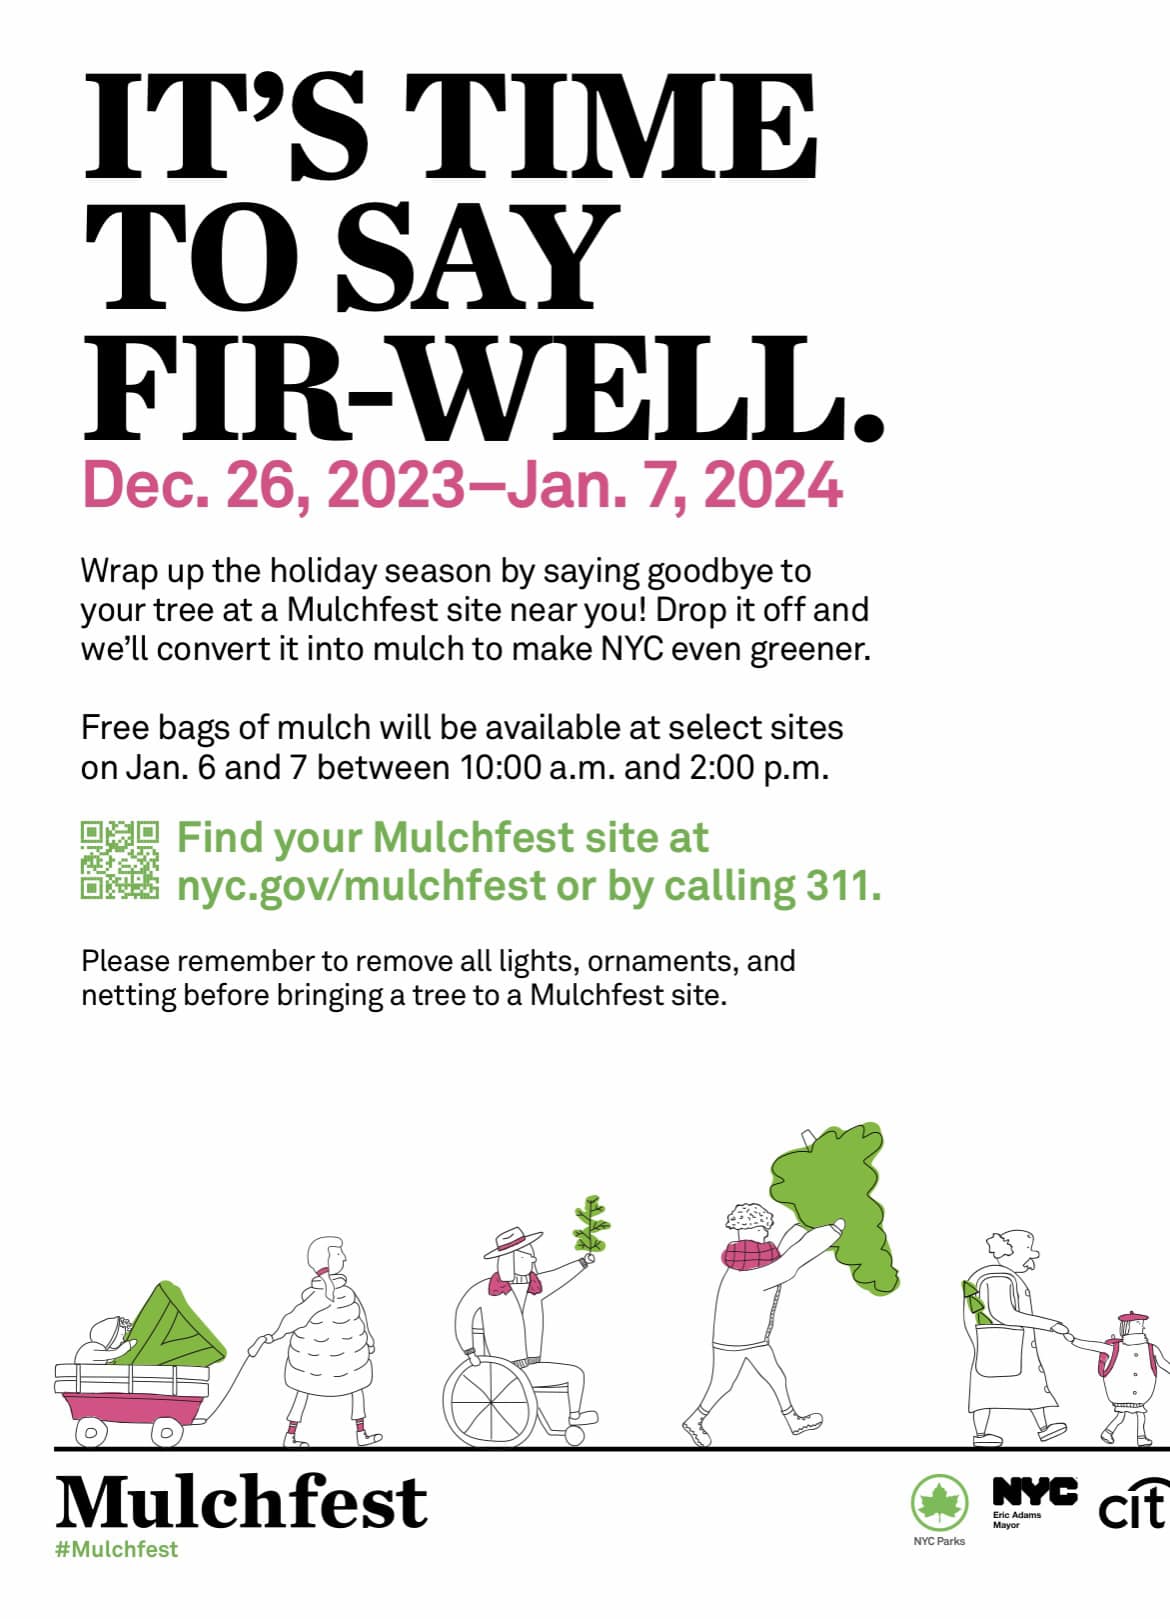 Say fir-well to your holiday tree at NYC Parks!